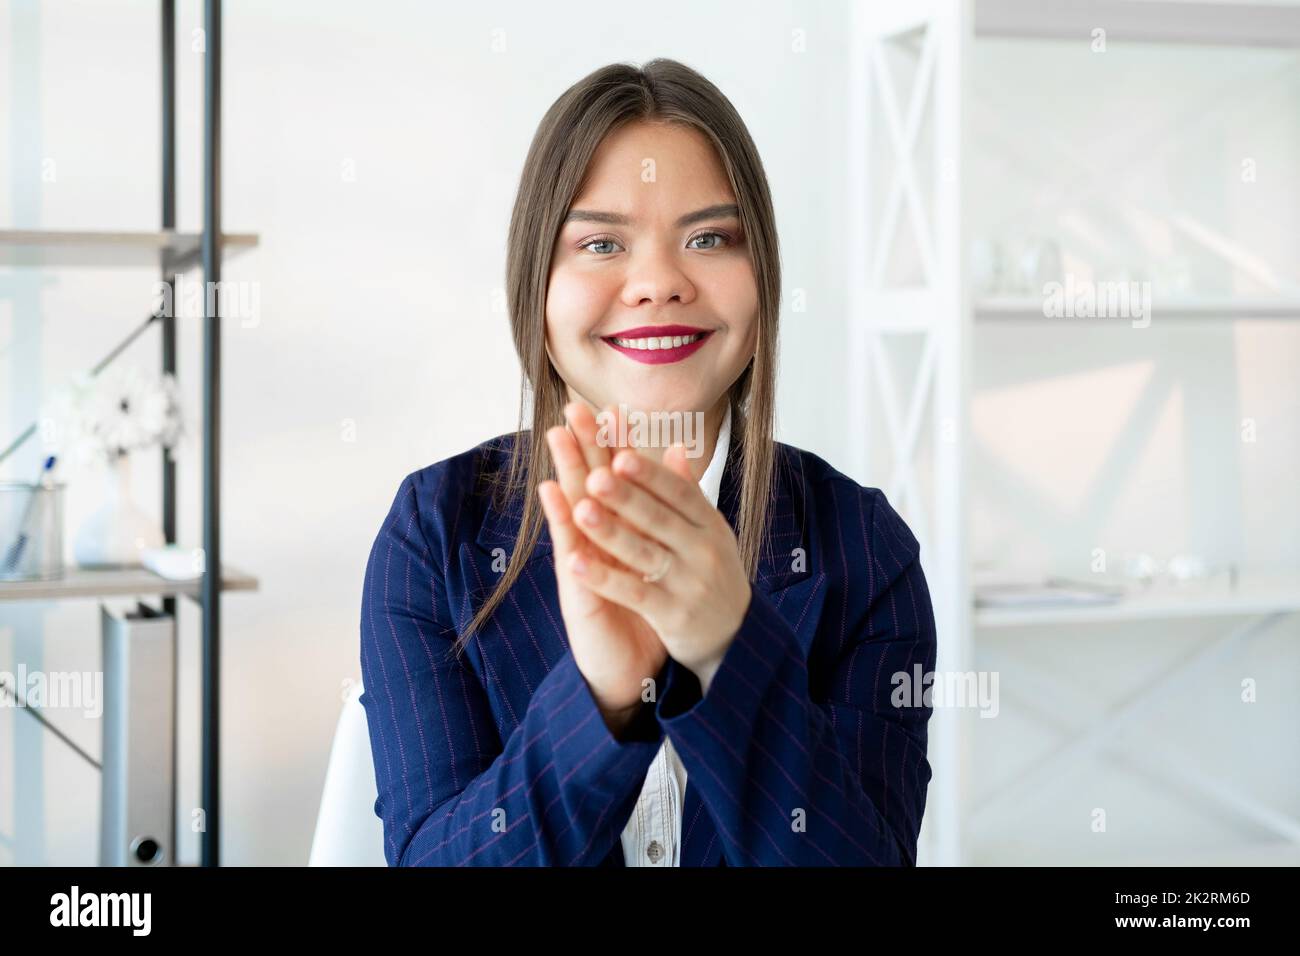 Successful career. Corporate congratulation. Professional growth. Goal achievement. Cheerful satisfied smart business woman smiling applauding in ligh Stock Photo